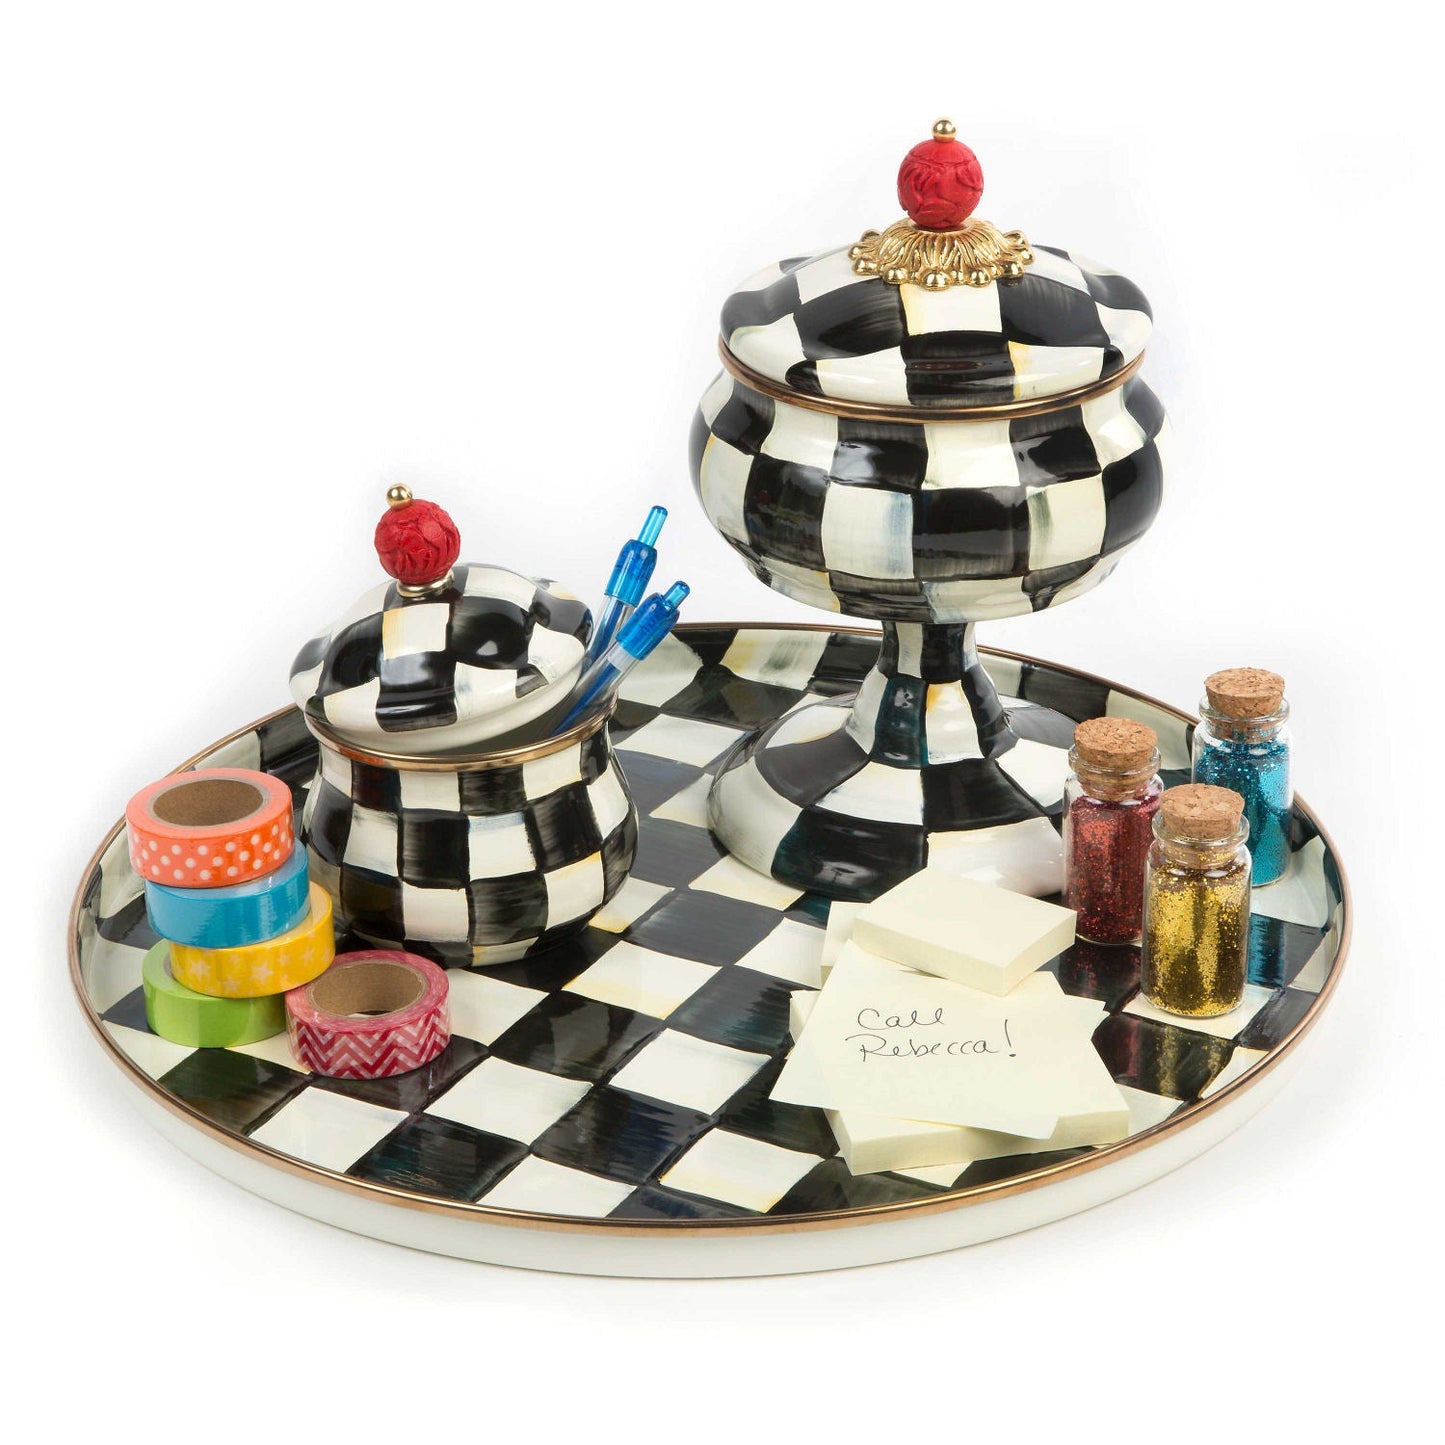 MacKenzie - Childs Courtly Check Lidded Sugar Bowl - |VESIMI Design| Luxury Bathrooms and Home Decor